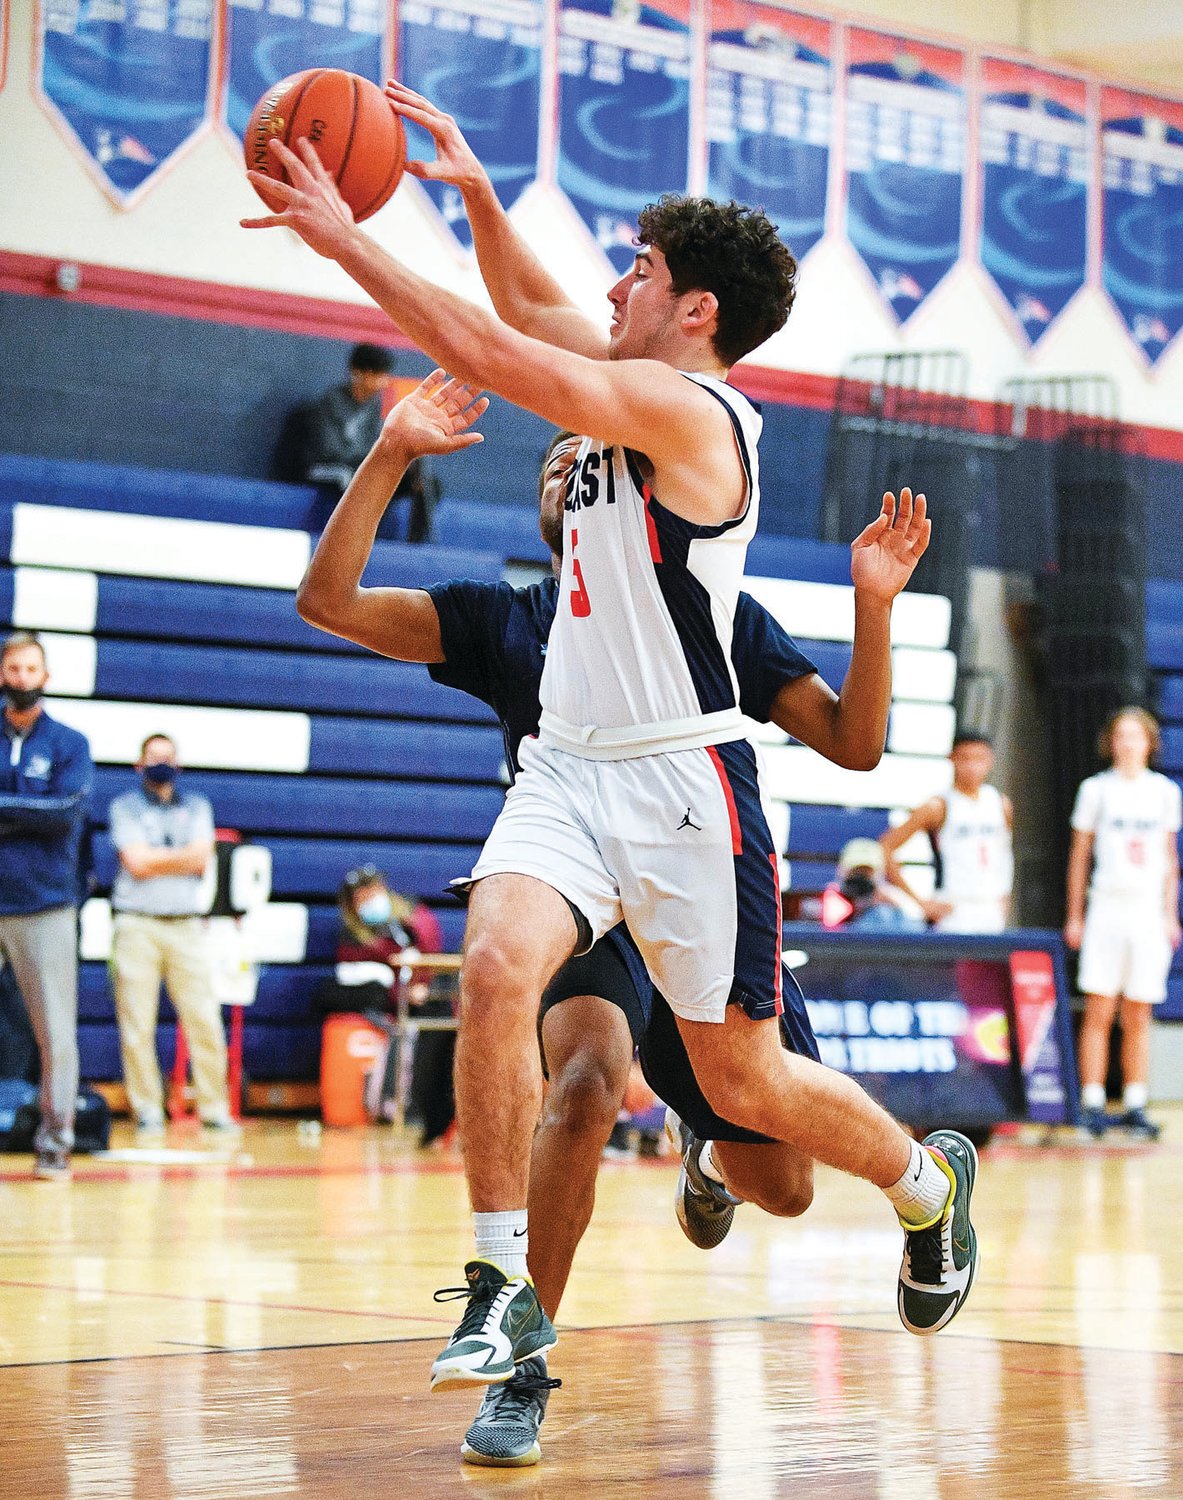 CB East’s Nick Rivera drives the lane and dishes off a pass in front of North Penn’s Joe Larkins.